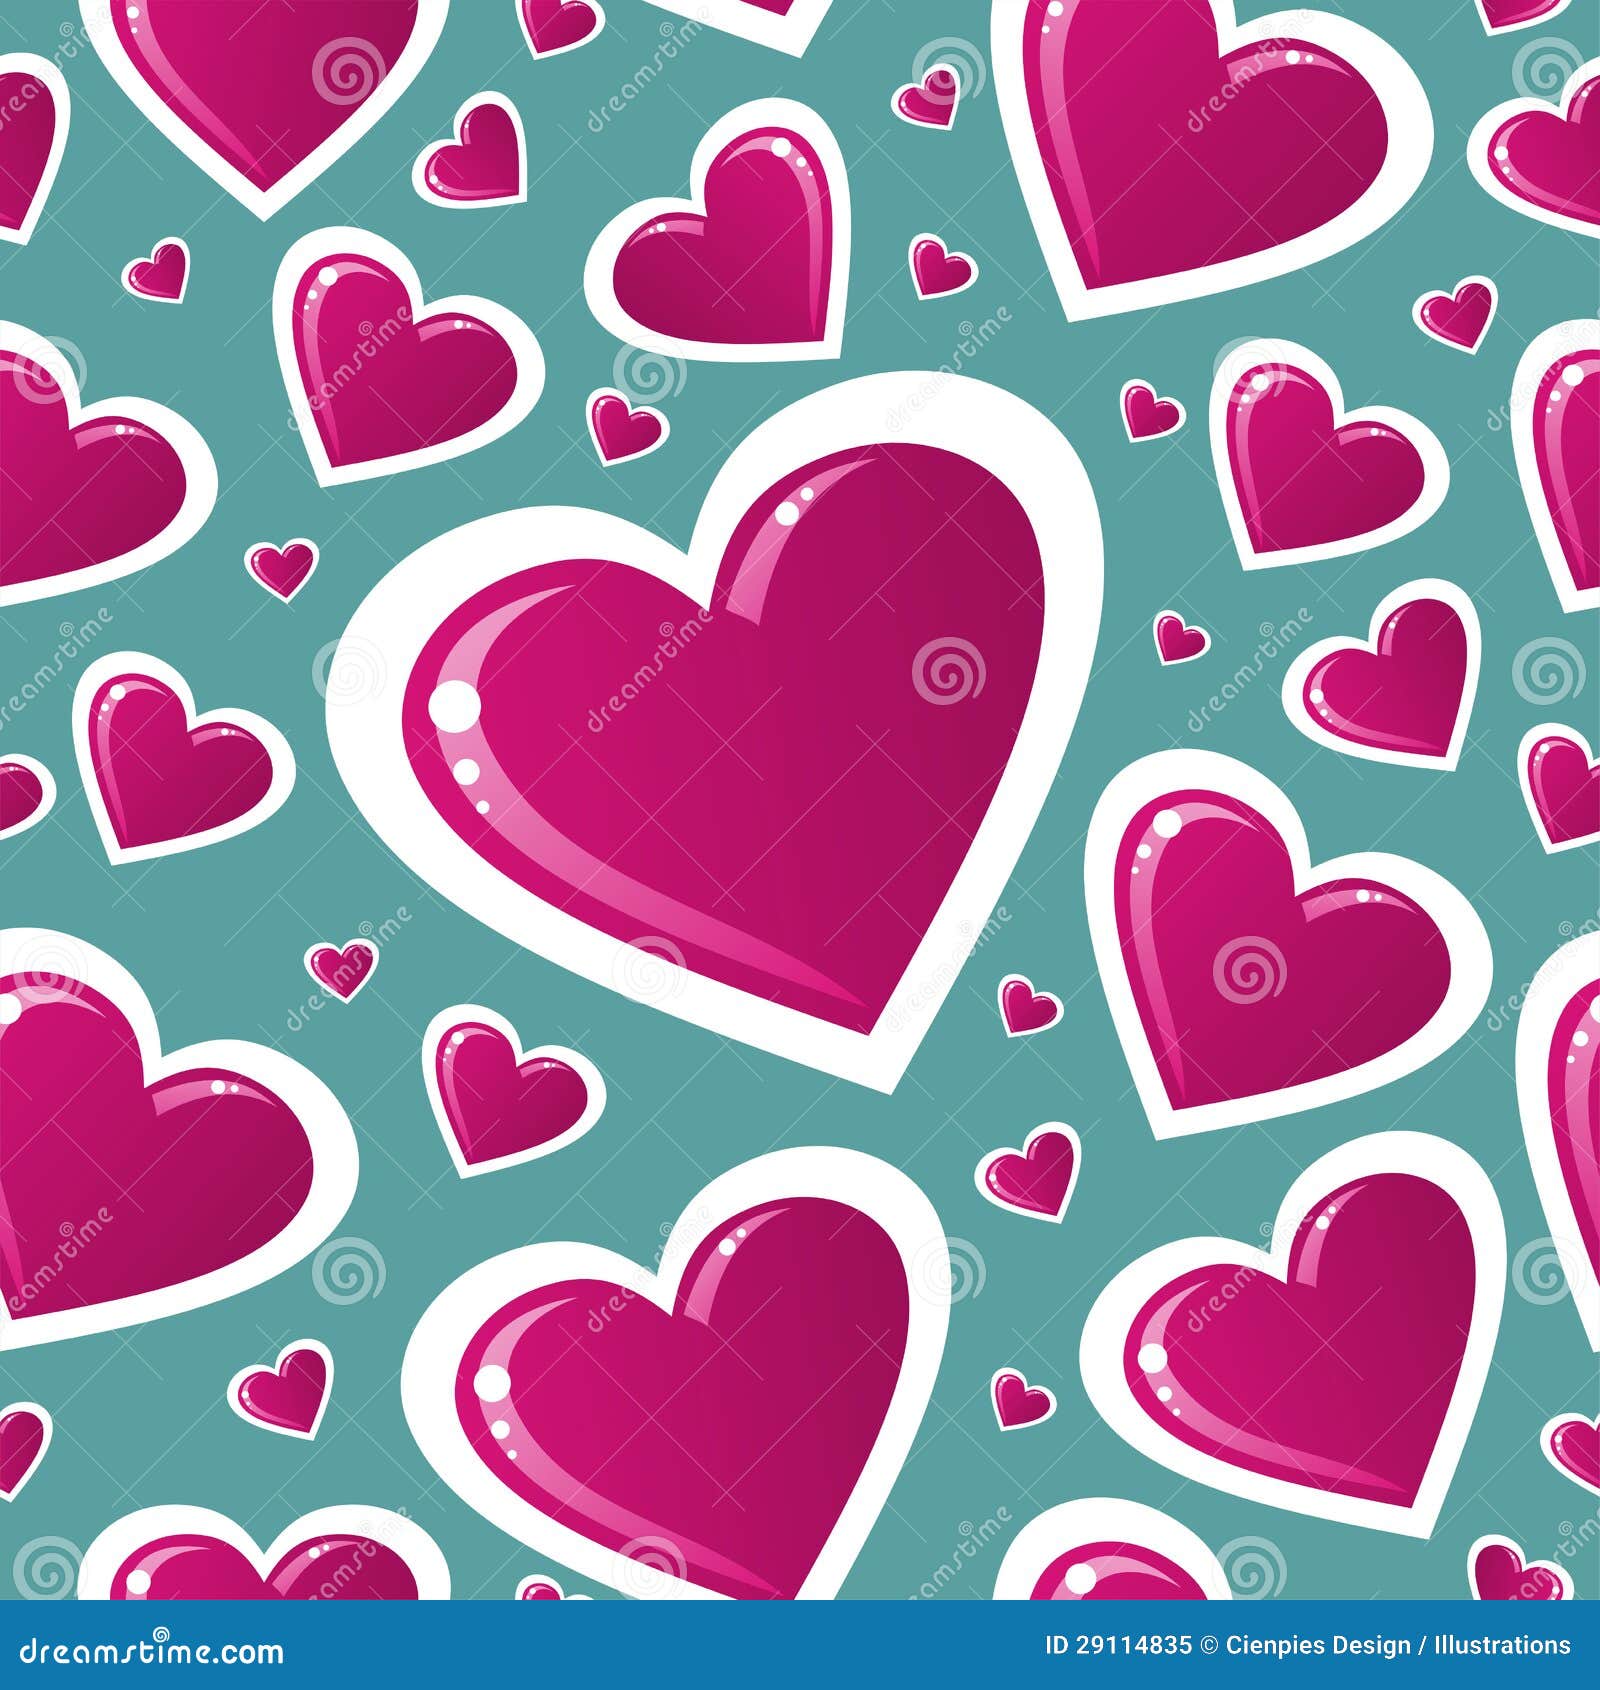 Pink love Vectors & Illustrations for Free Download